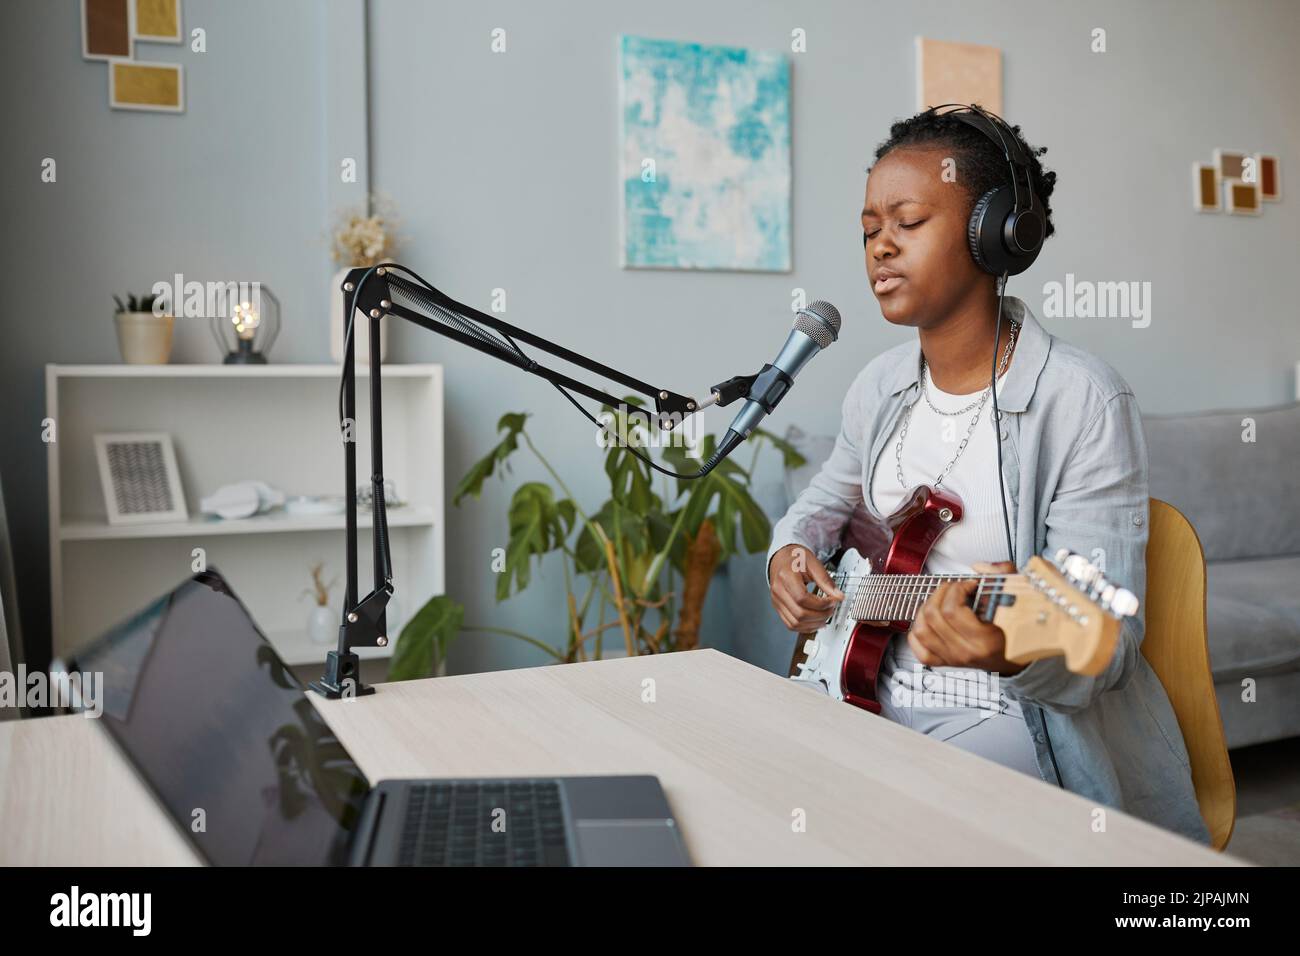 Minimal portrait of young black woman singing to microphone and playing guitar at home recording studio, copy space Stock Photo